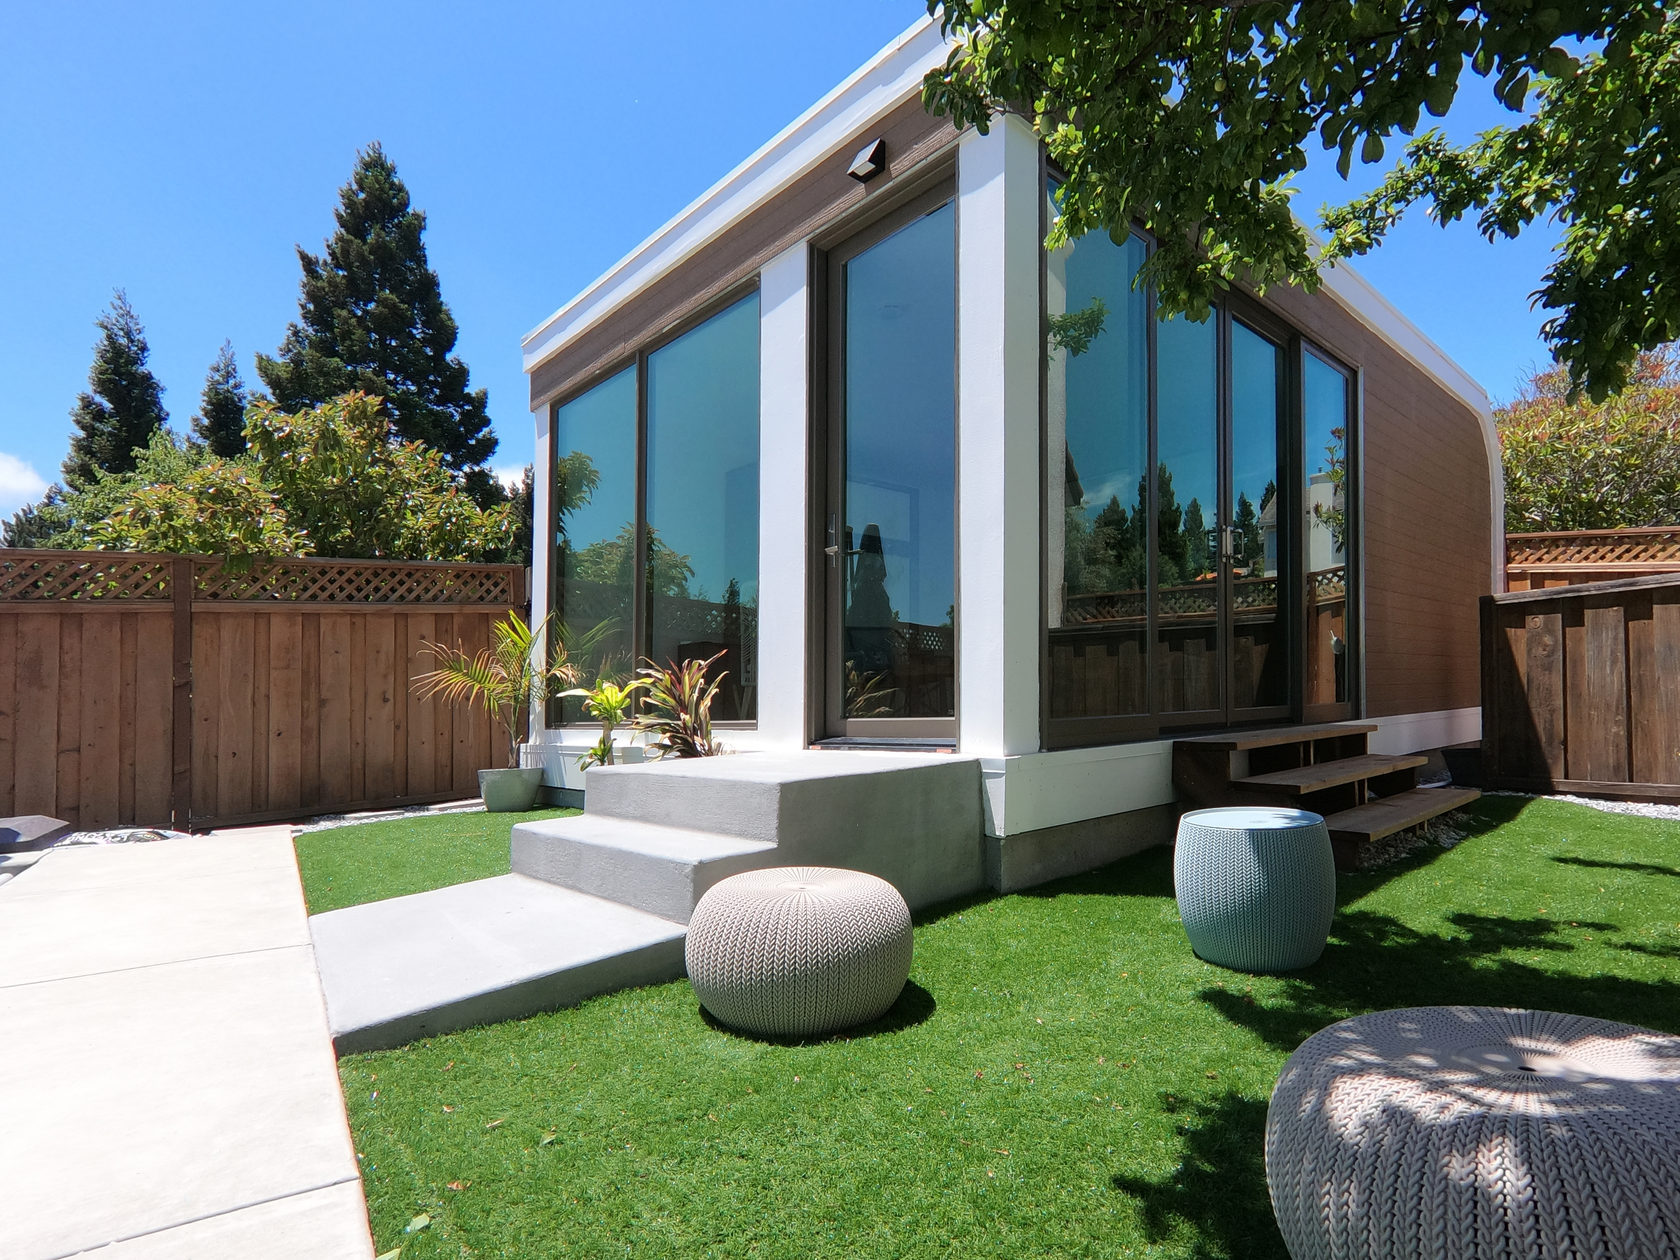 These cute backyard houses are entirely 3D-printed